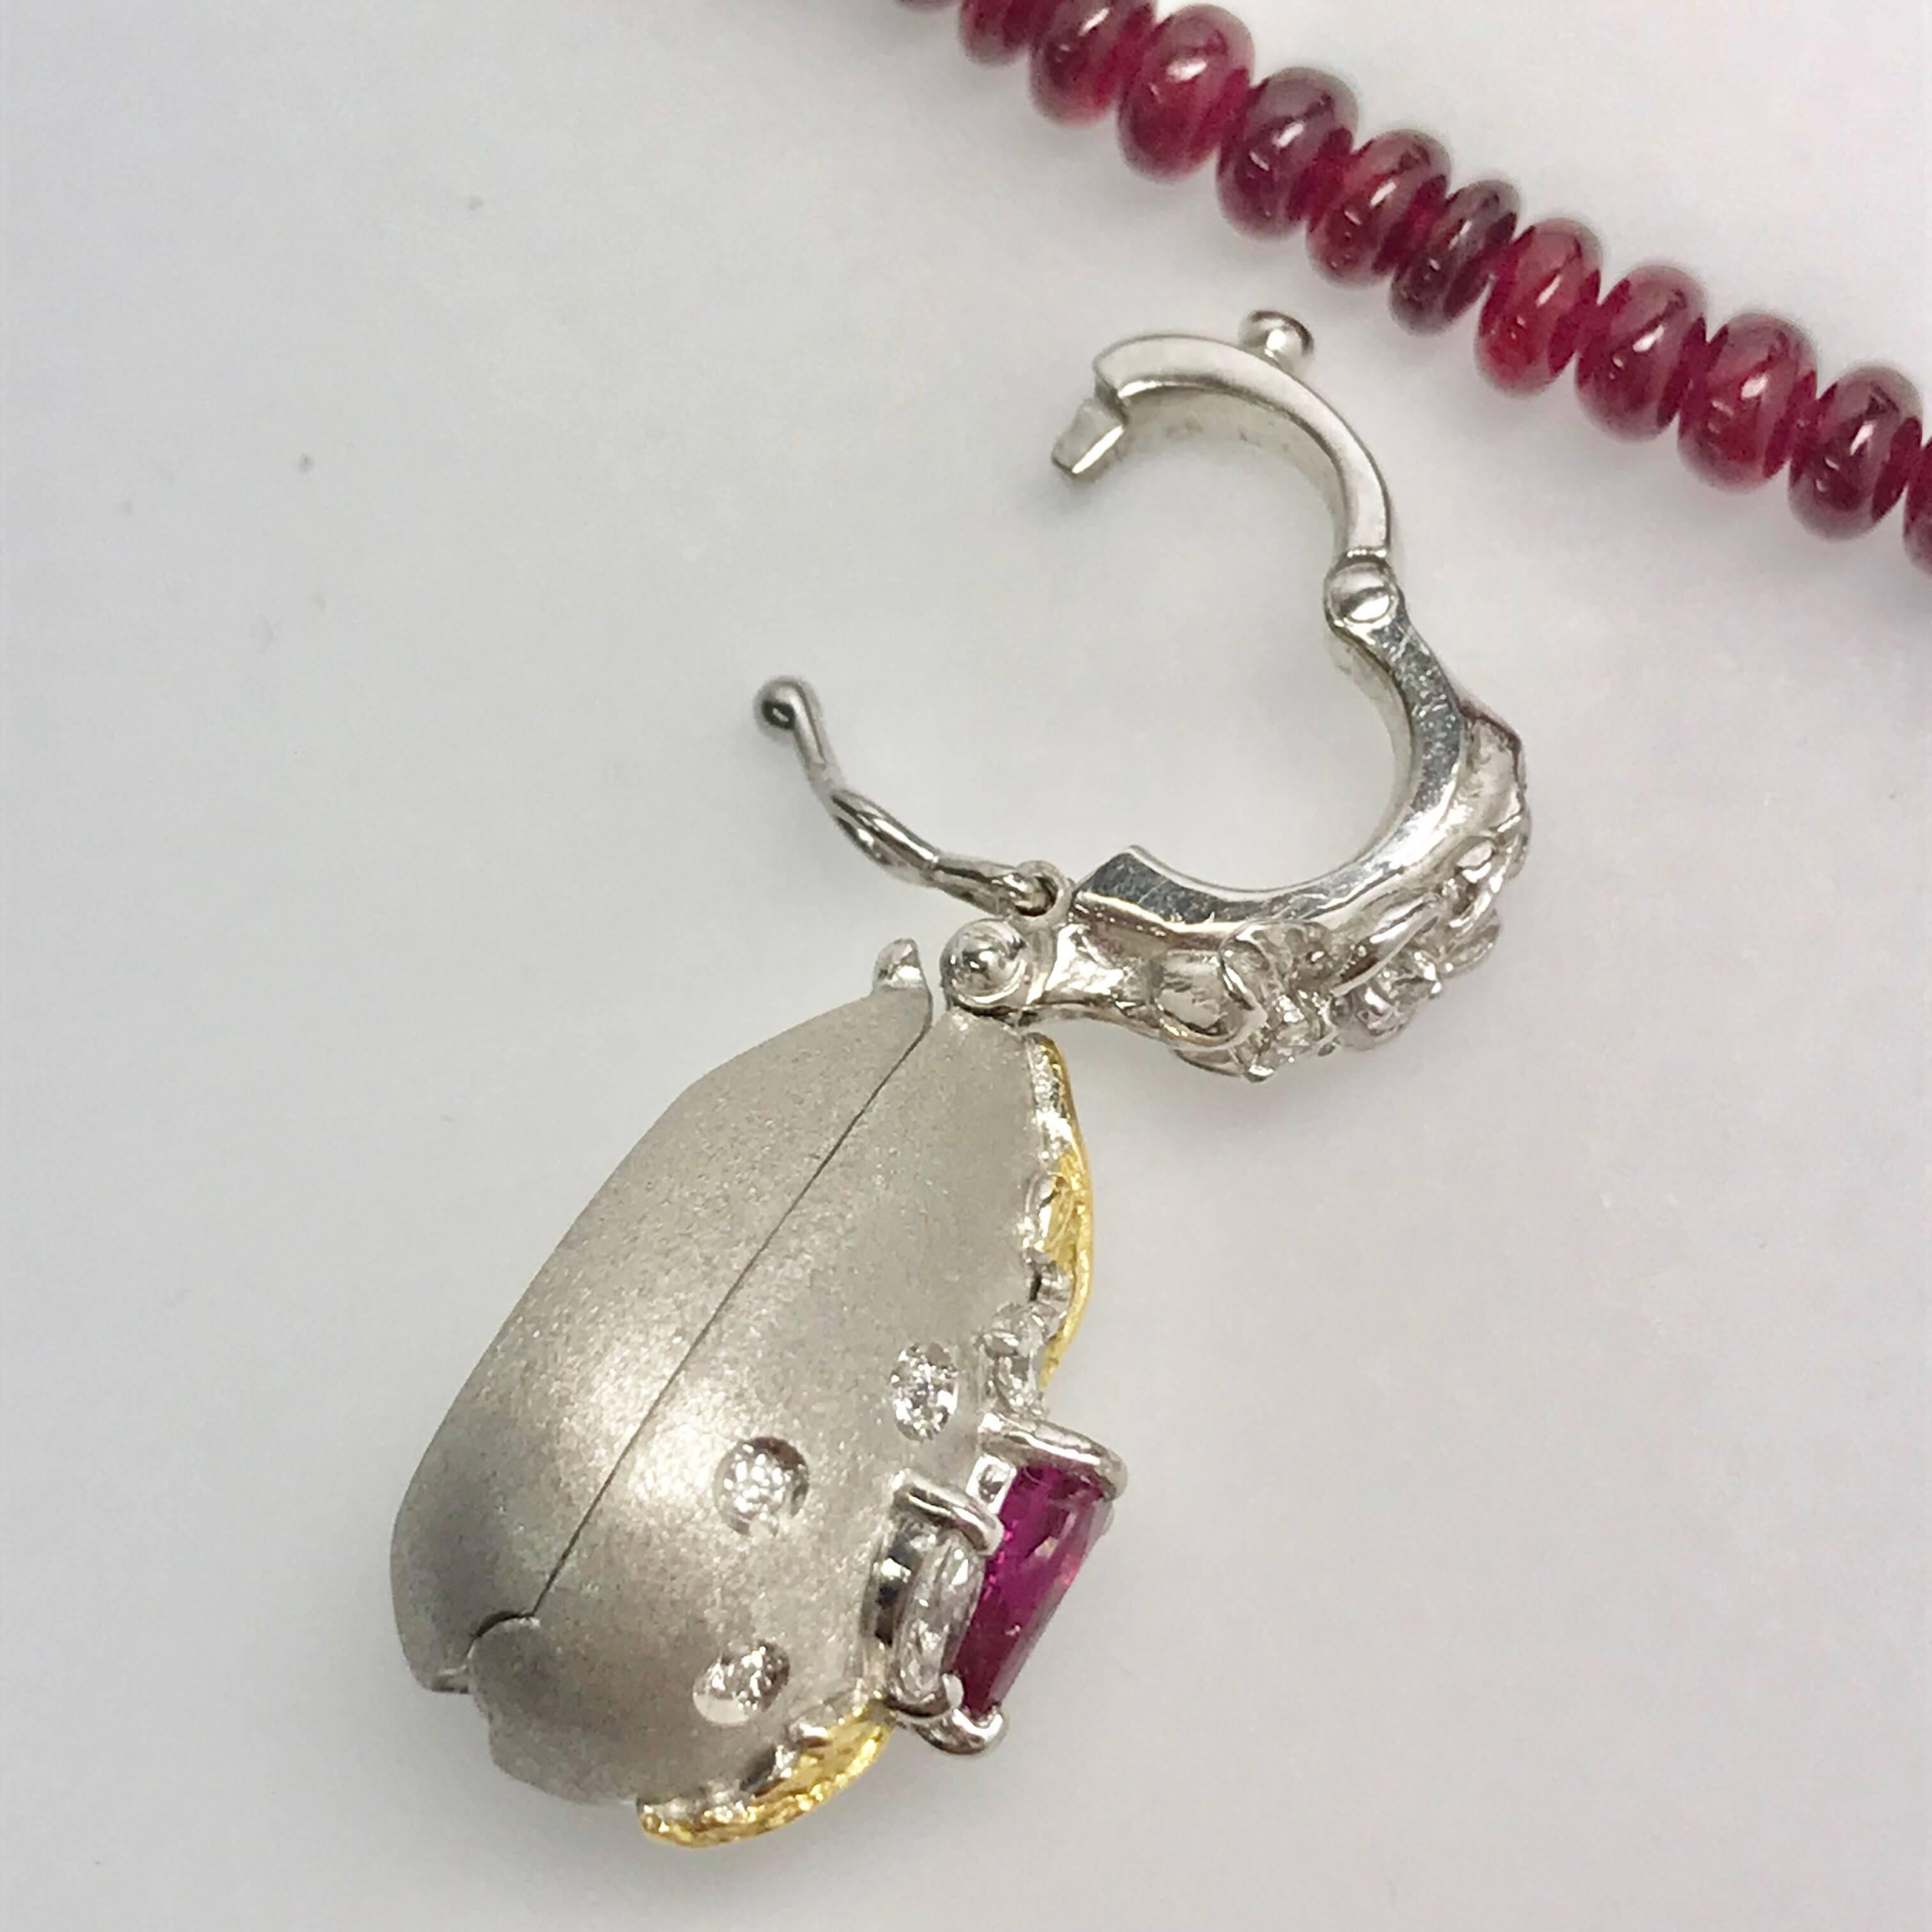 ruby beads with locket